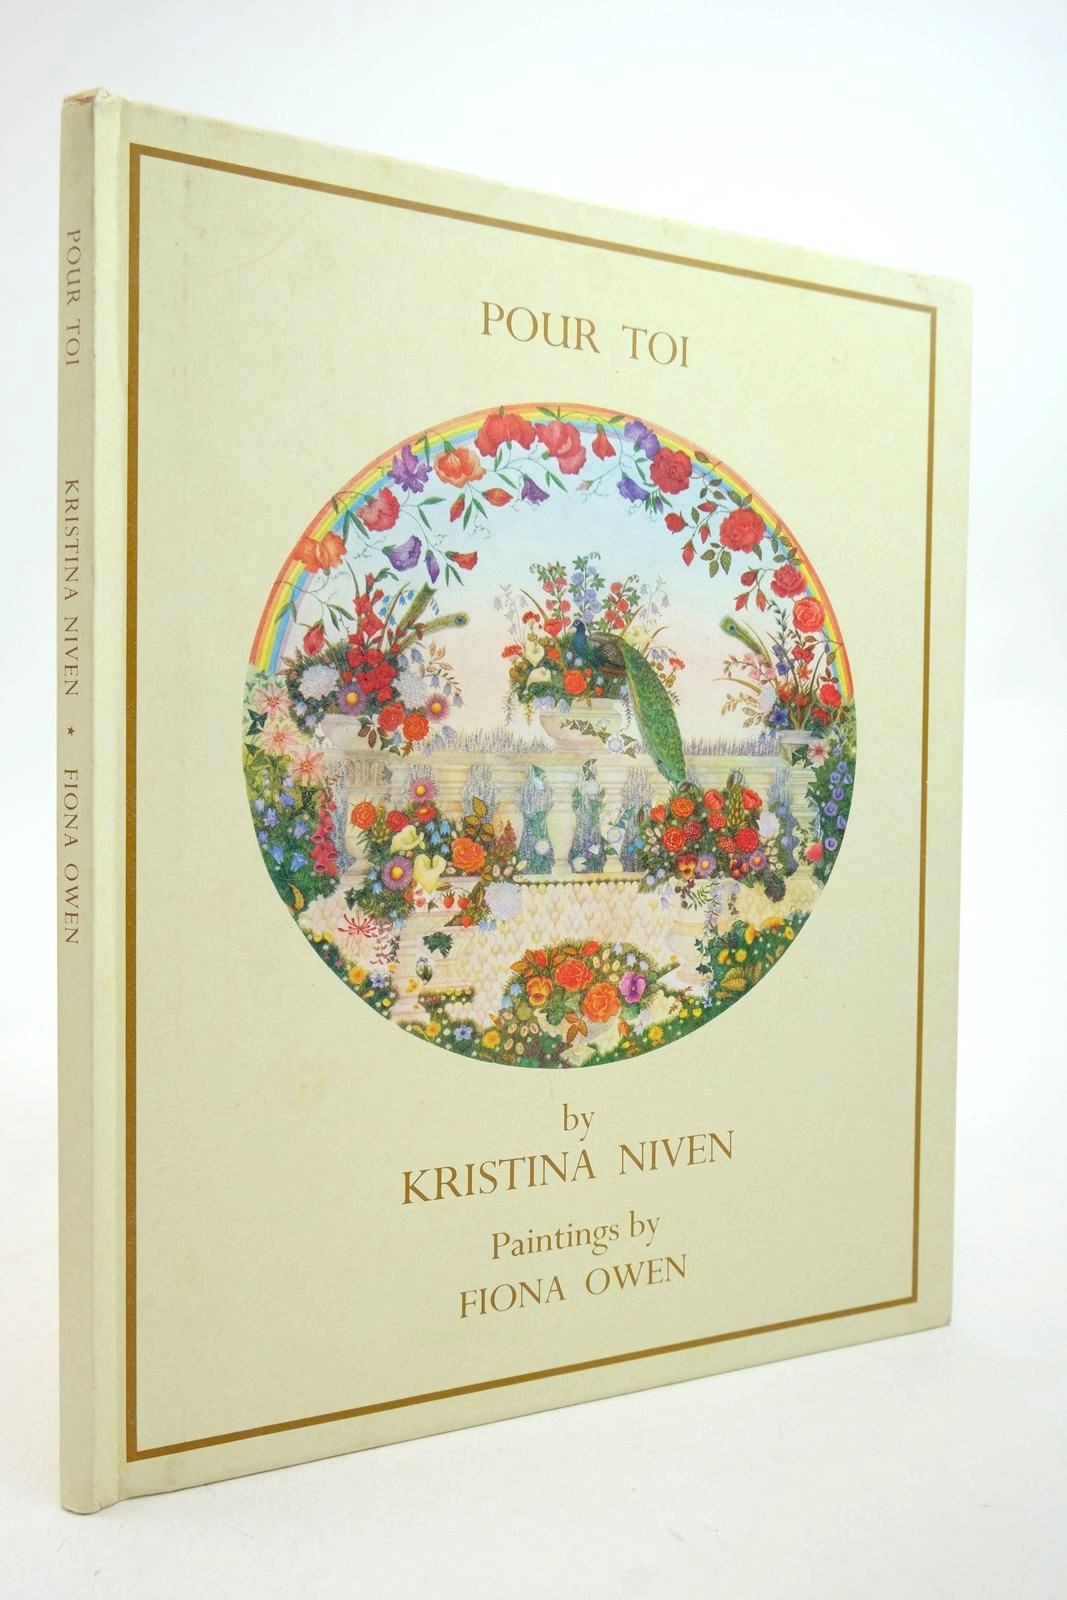 Photo of POUR TOI written by Niven, Kristina illustrated by Owen, Fiona published by The Medici Society Ltd. (STOCK CODE: 2140686)  for sale by Stella & Rose's Books